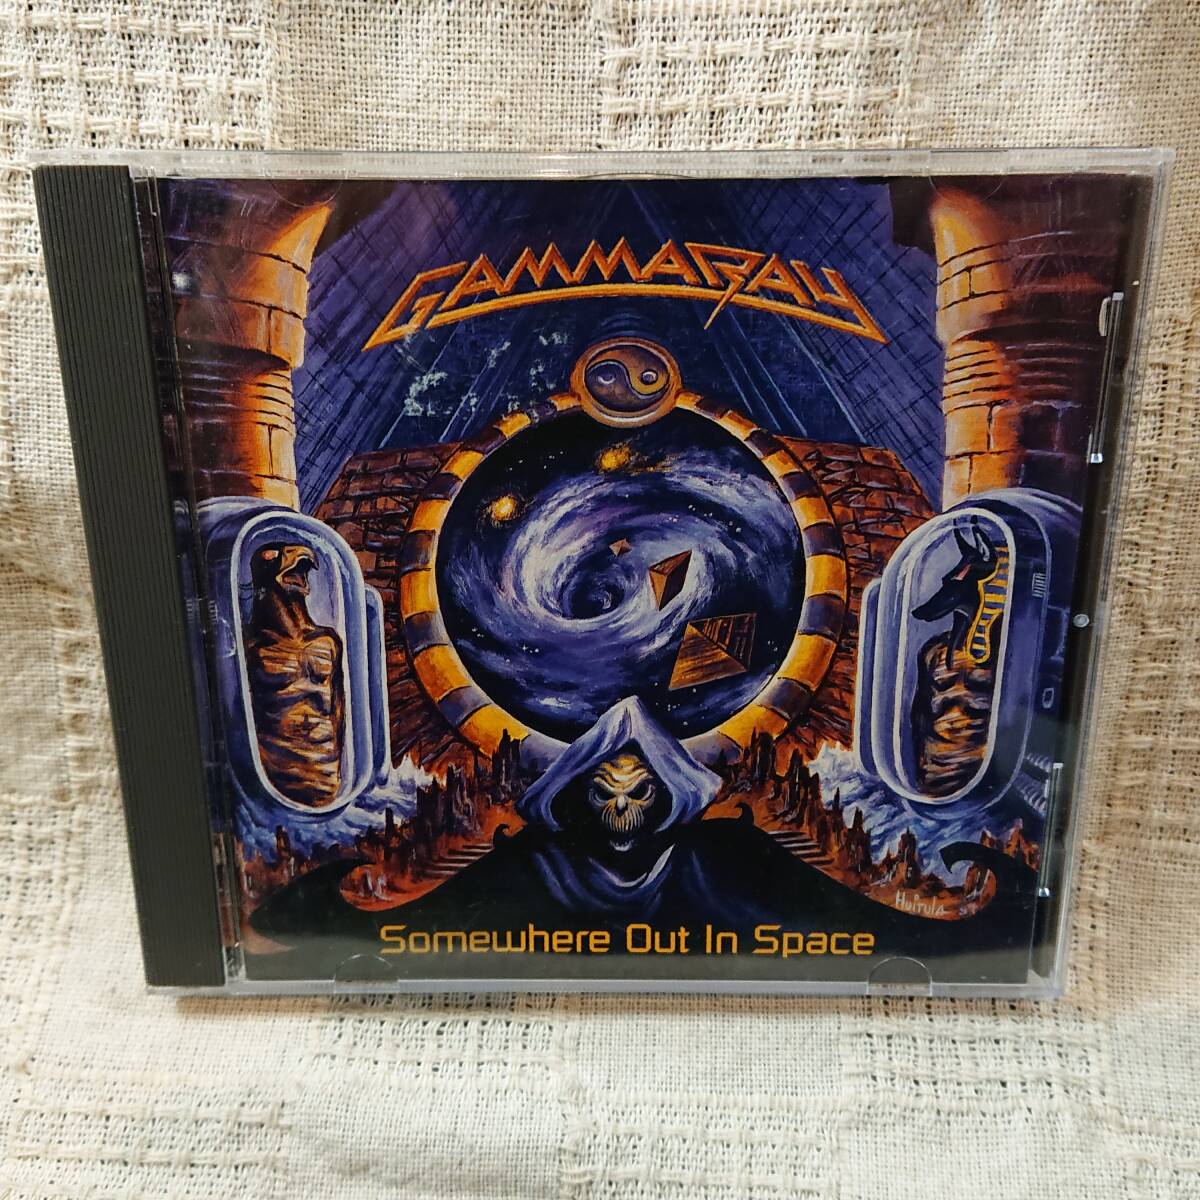 Gamma Ray SOMEWHERE OUT IN SPACE ガンマ・レイ 美品　CD 　送料定形外郵便250円発送 [Af]_画像1